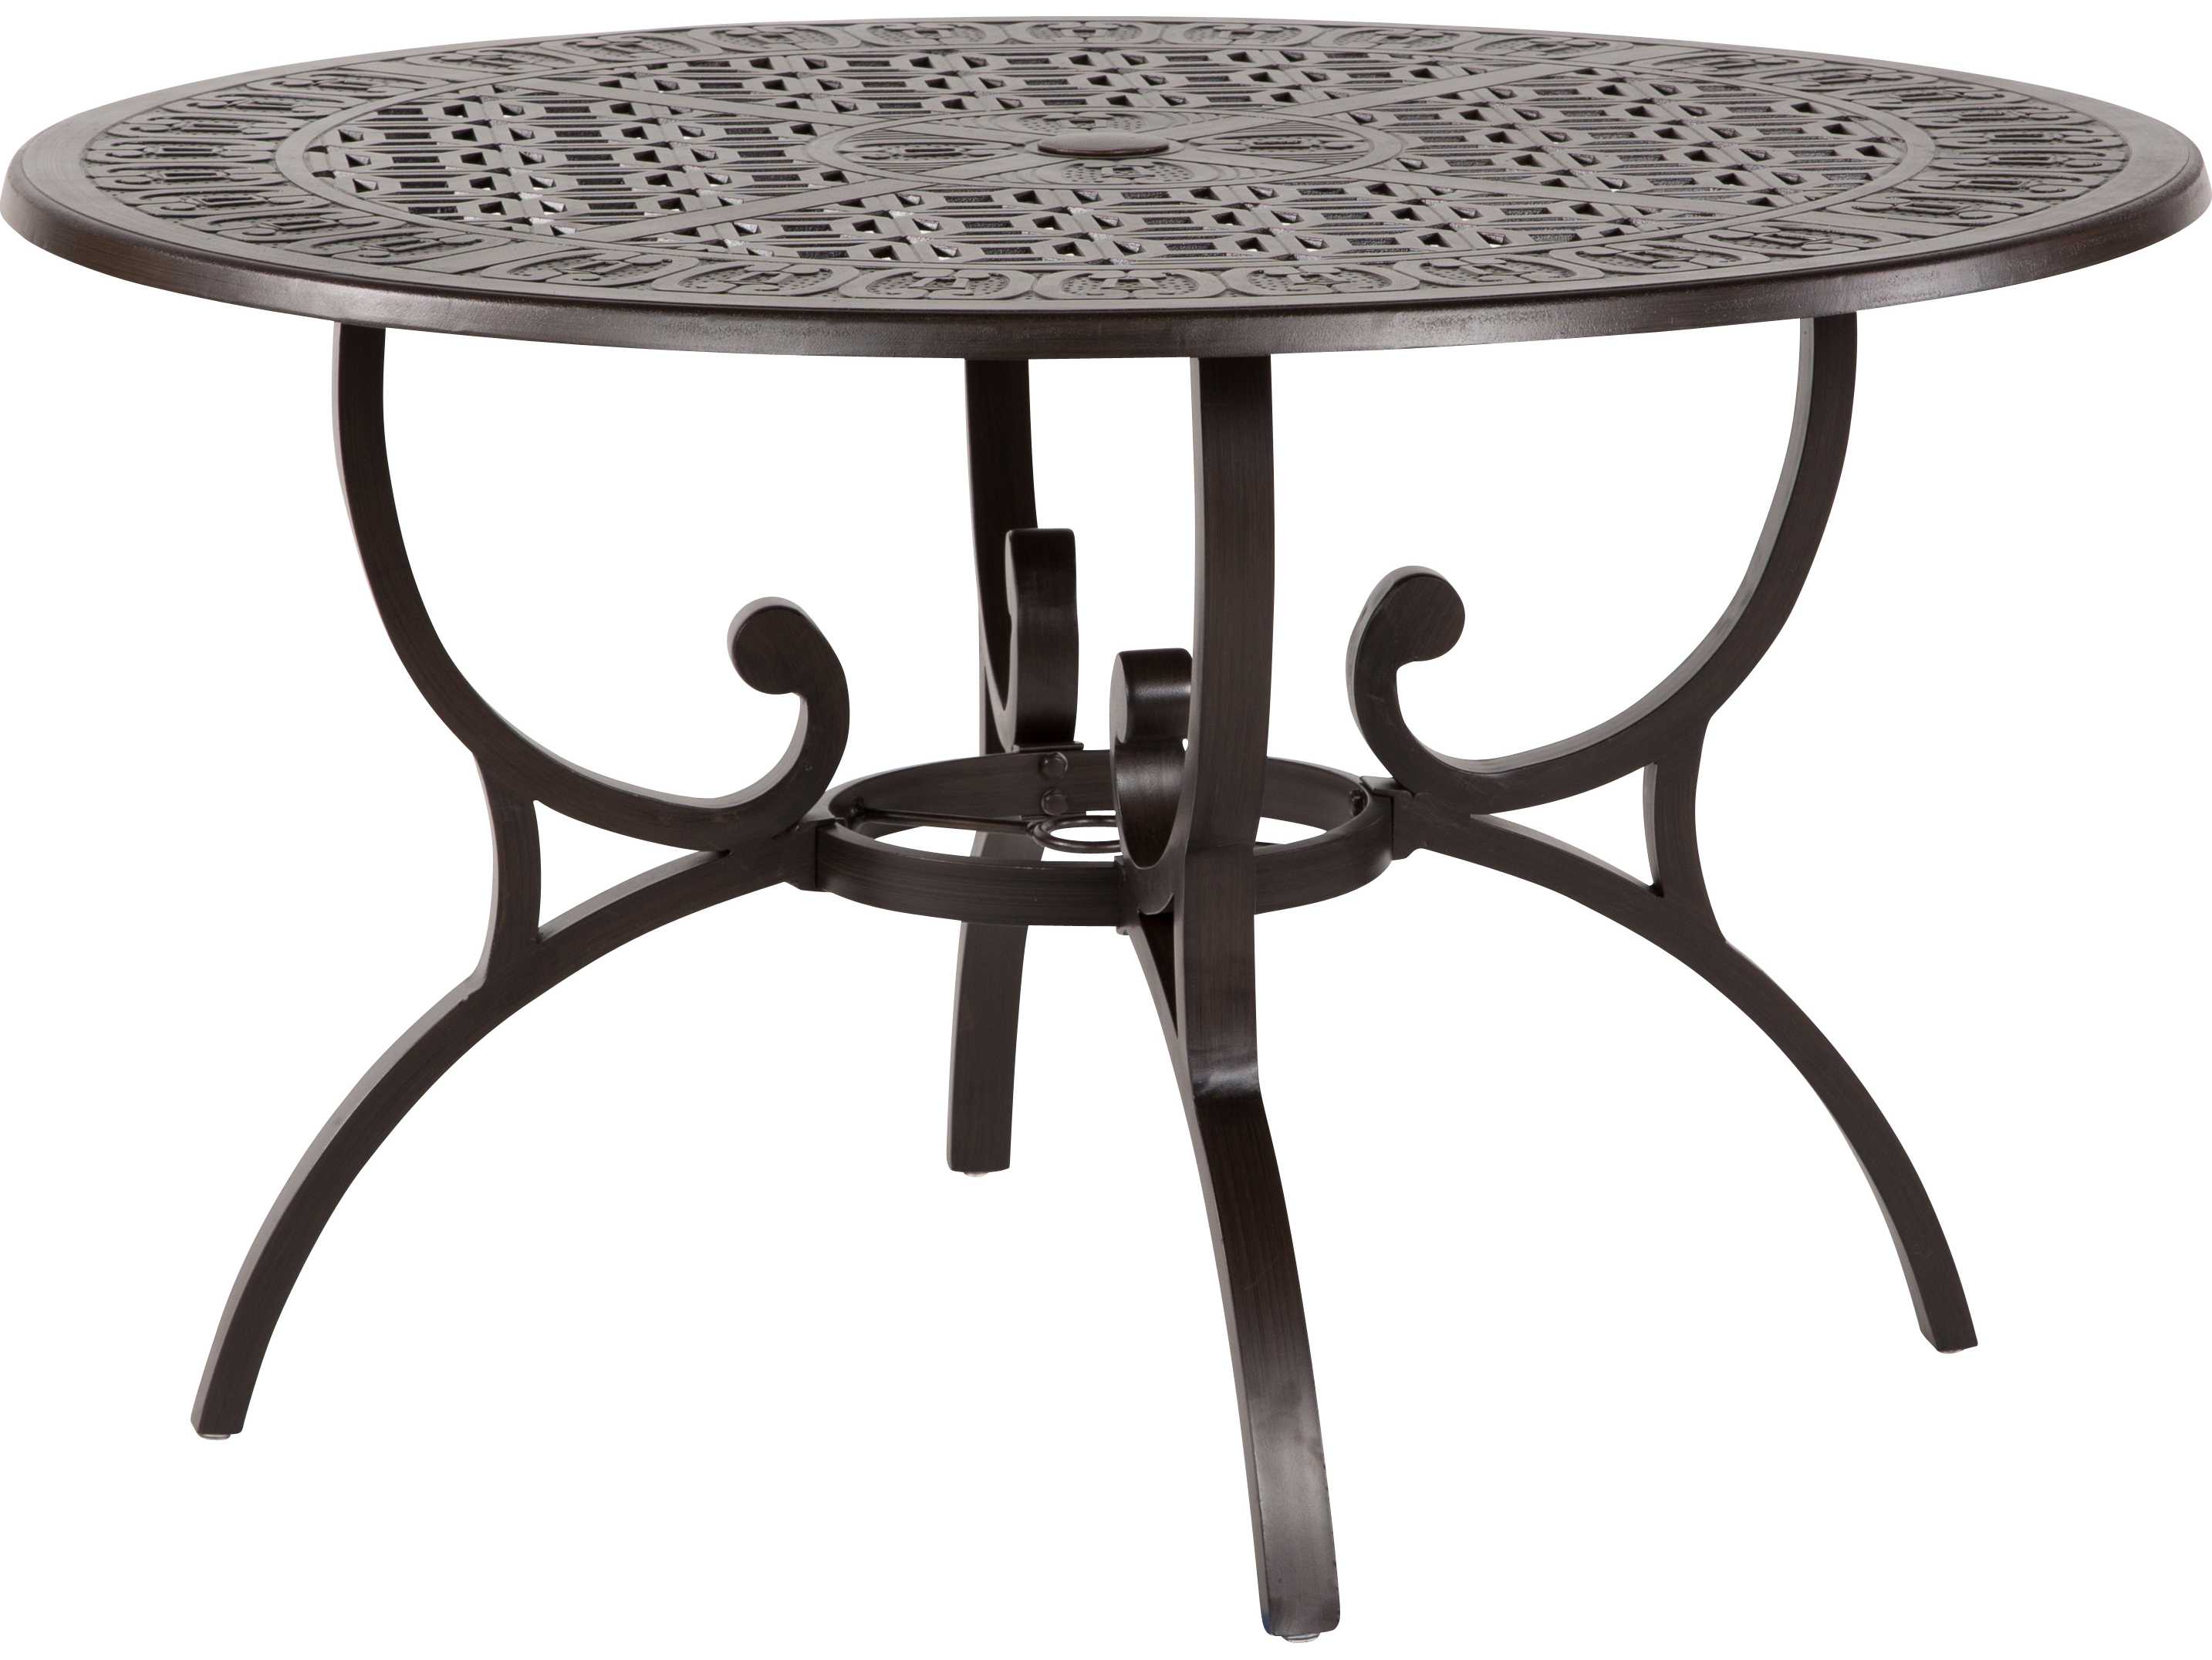 Round Black Patio Coffee Table : POLYWOOD Round Outdoor Coffee Table 38